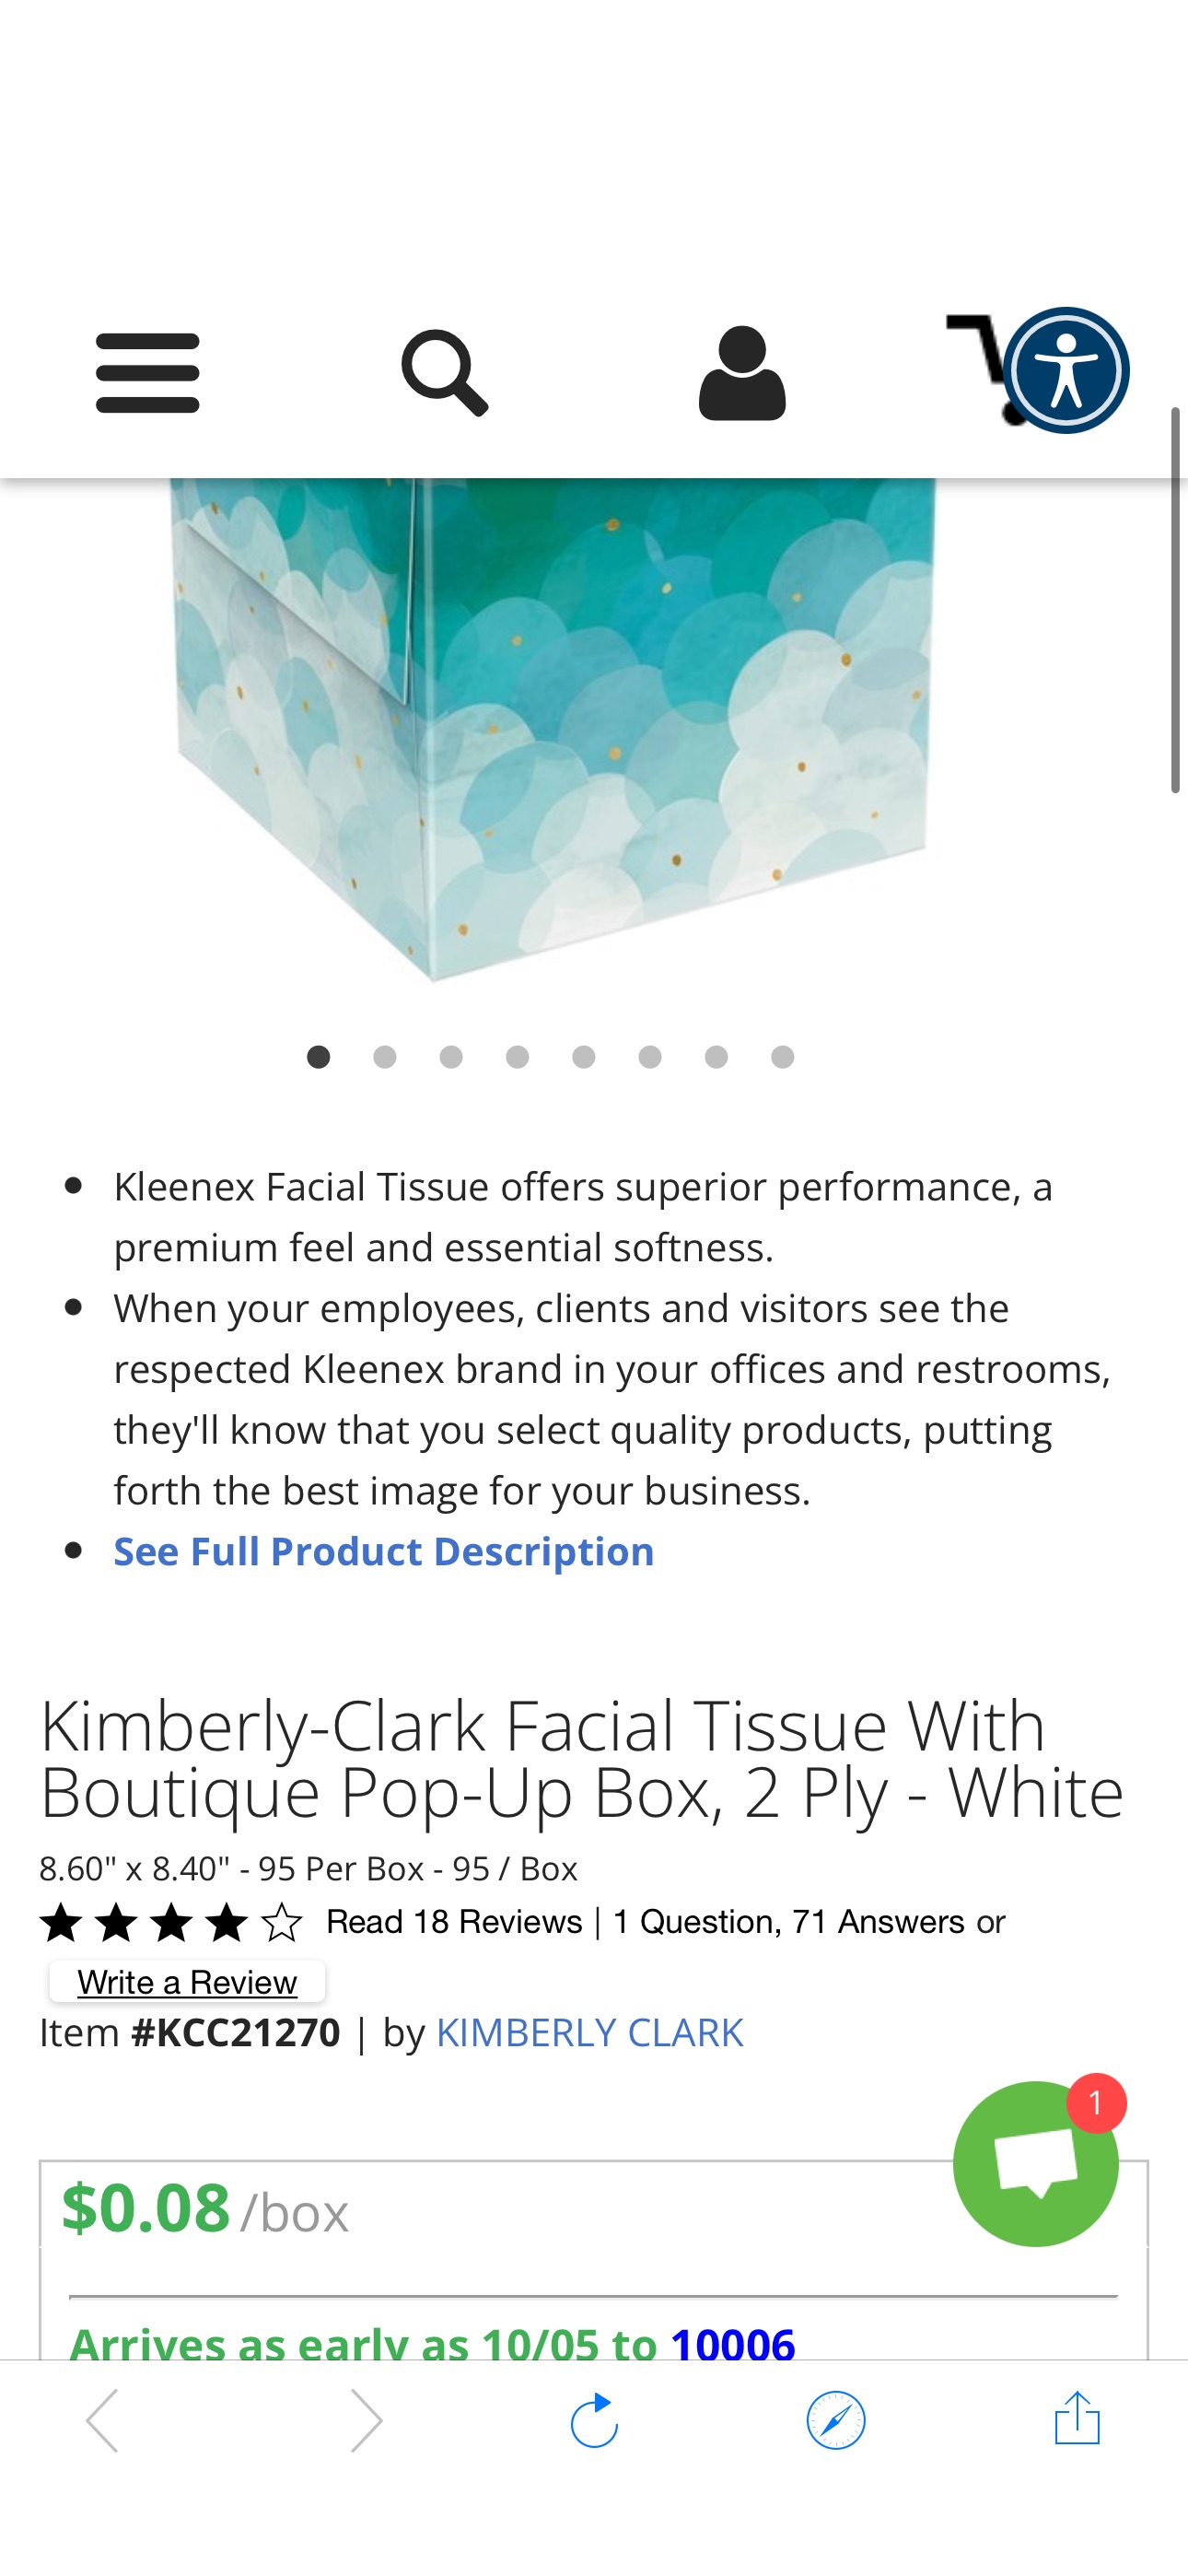 Kimberly-Clark Facial Tissue With Boutique Pop-Up Box - KCC21270 - Shoplet.com